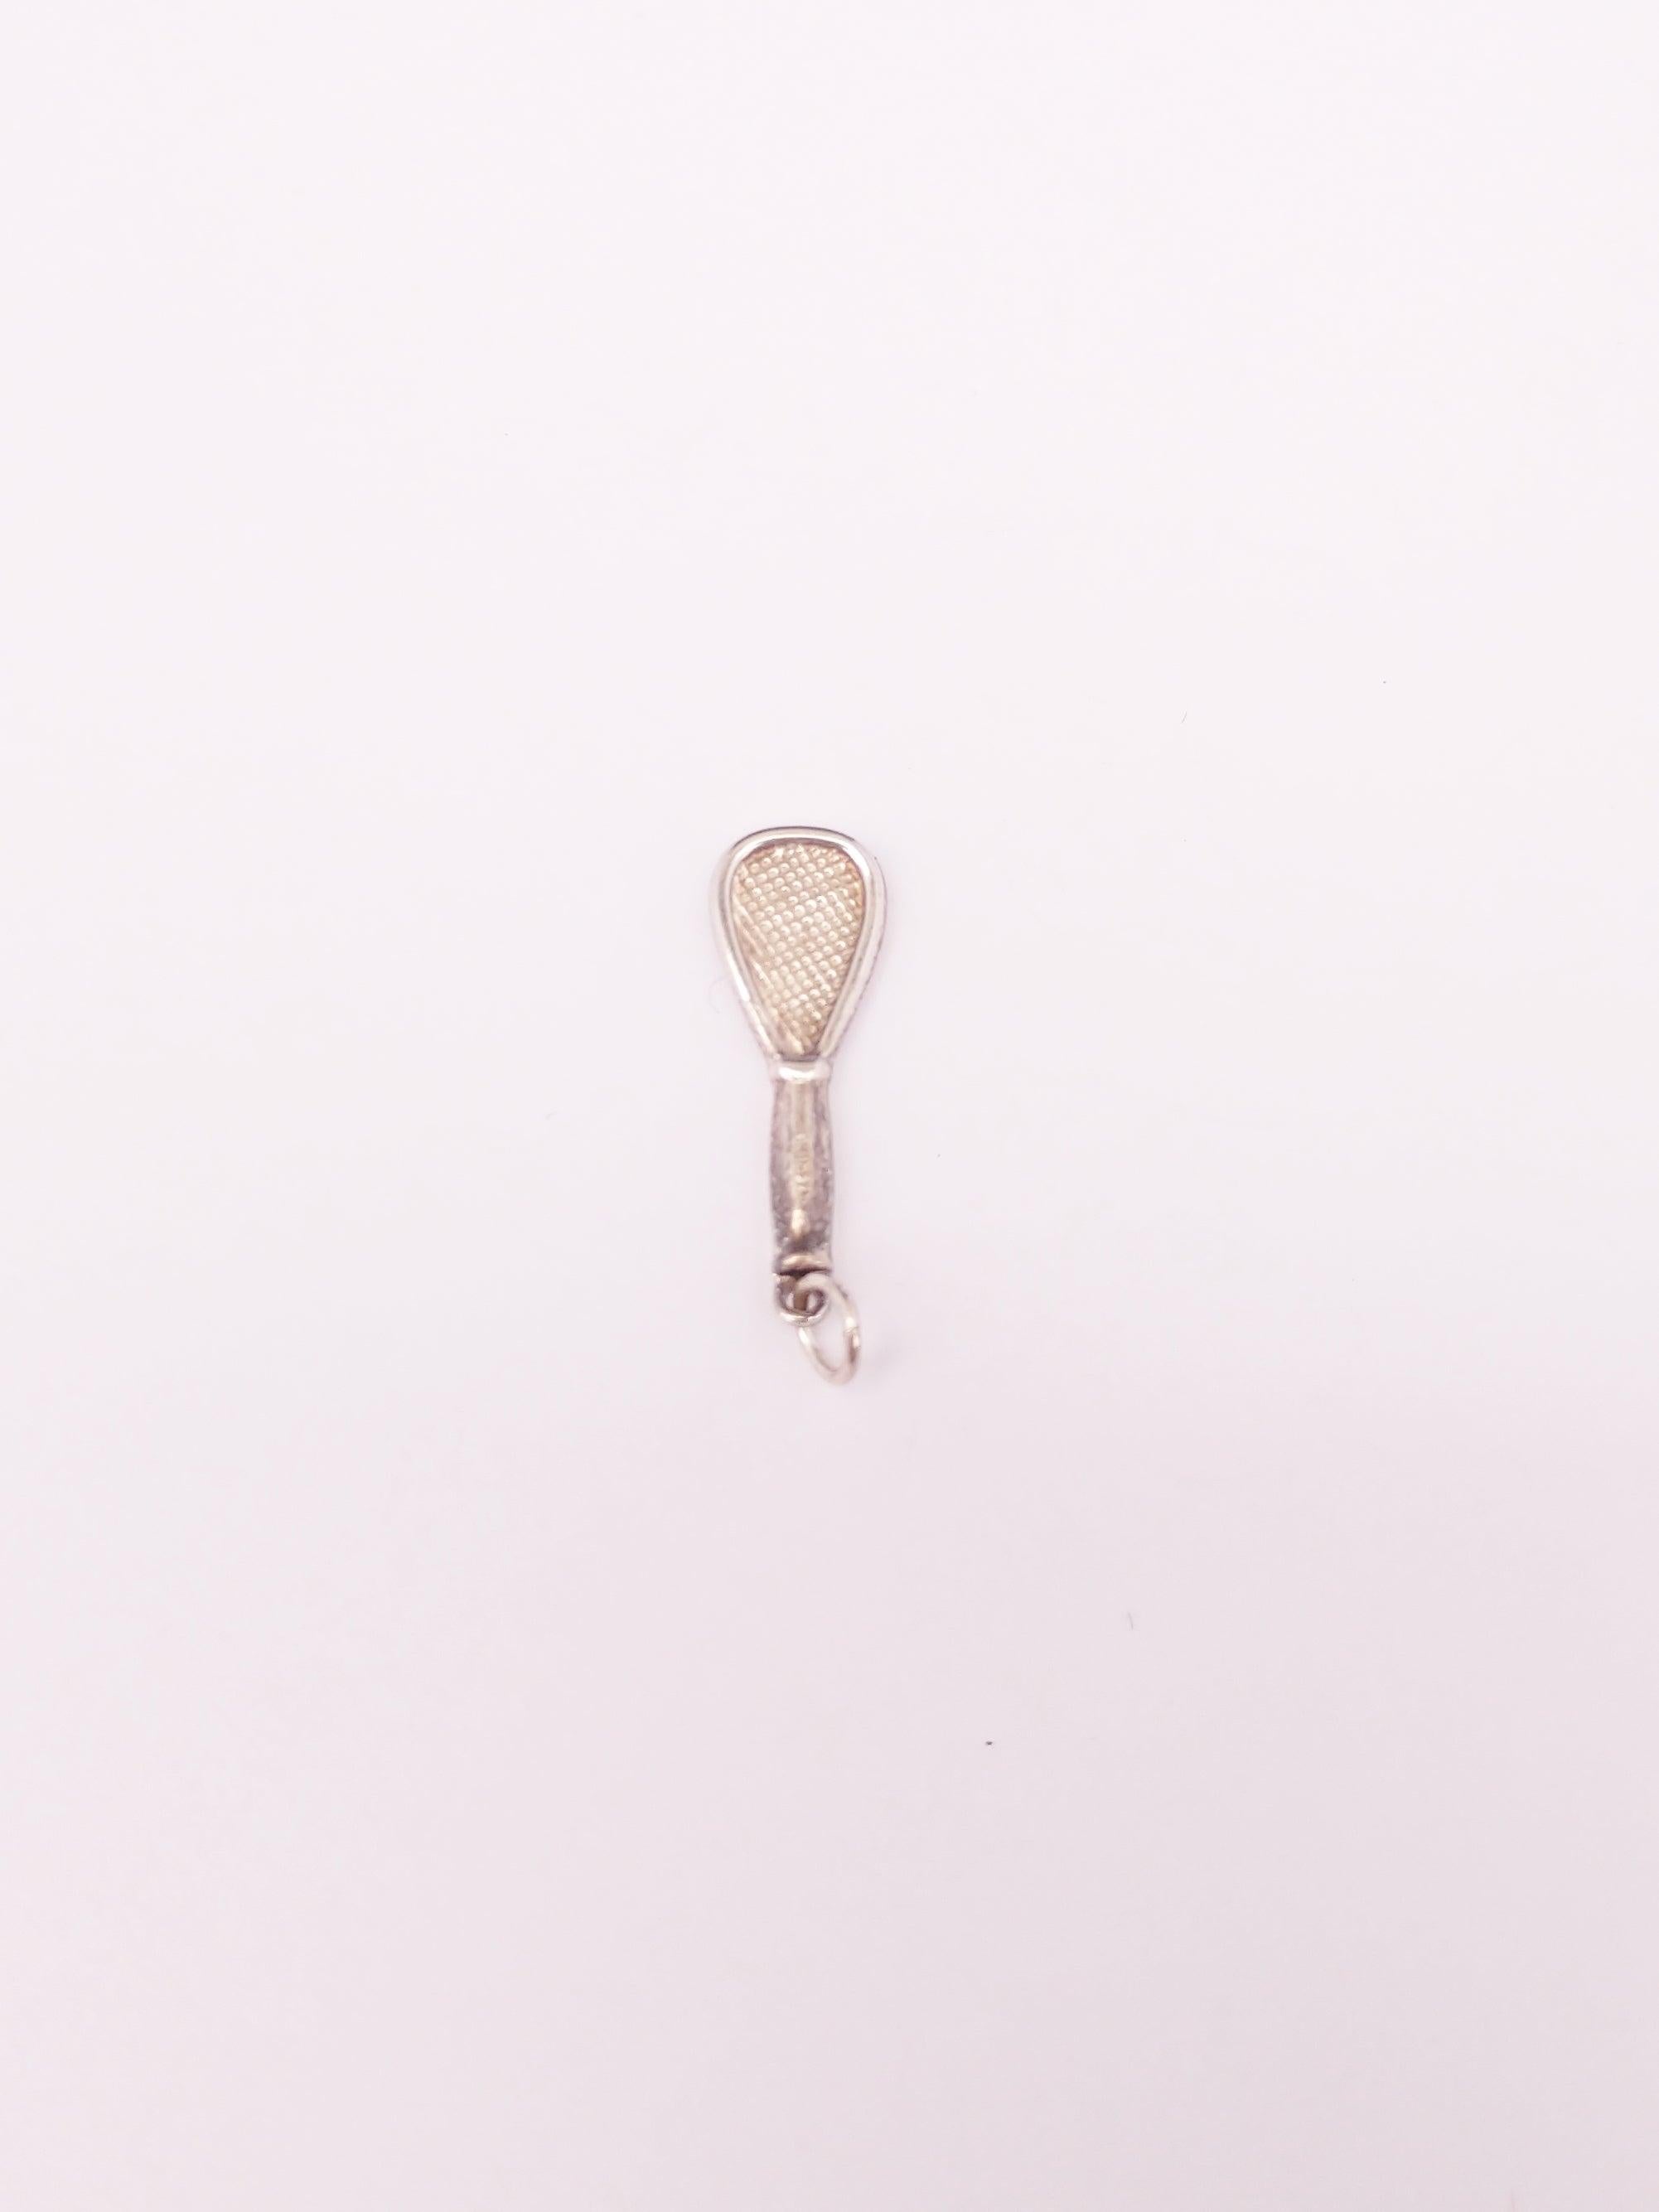 Vintage Tennis Racket Sterling Silver Charm - Hers and His Treasures